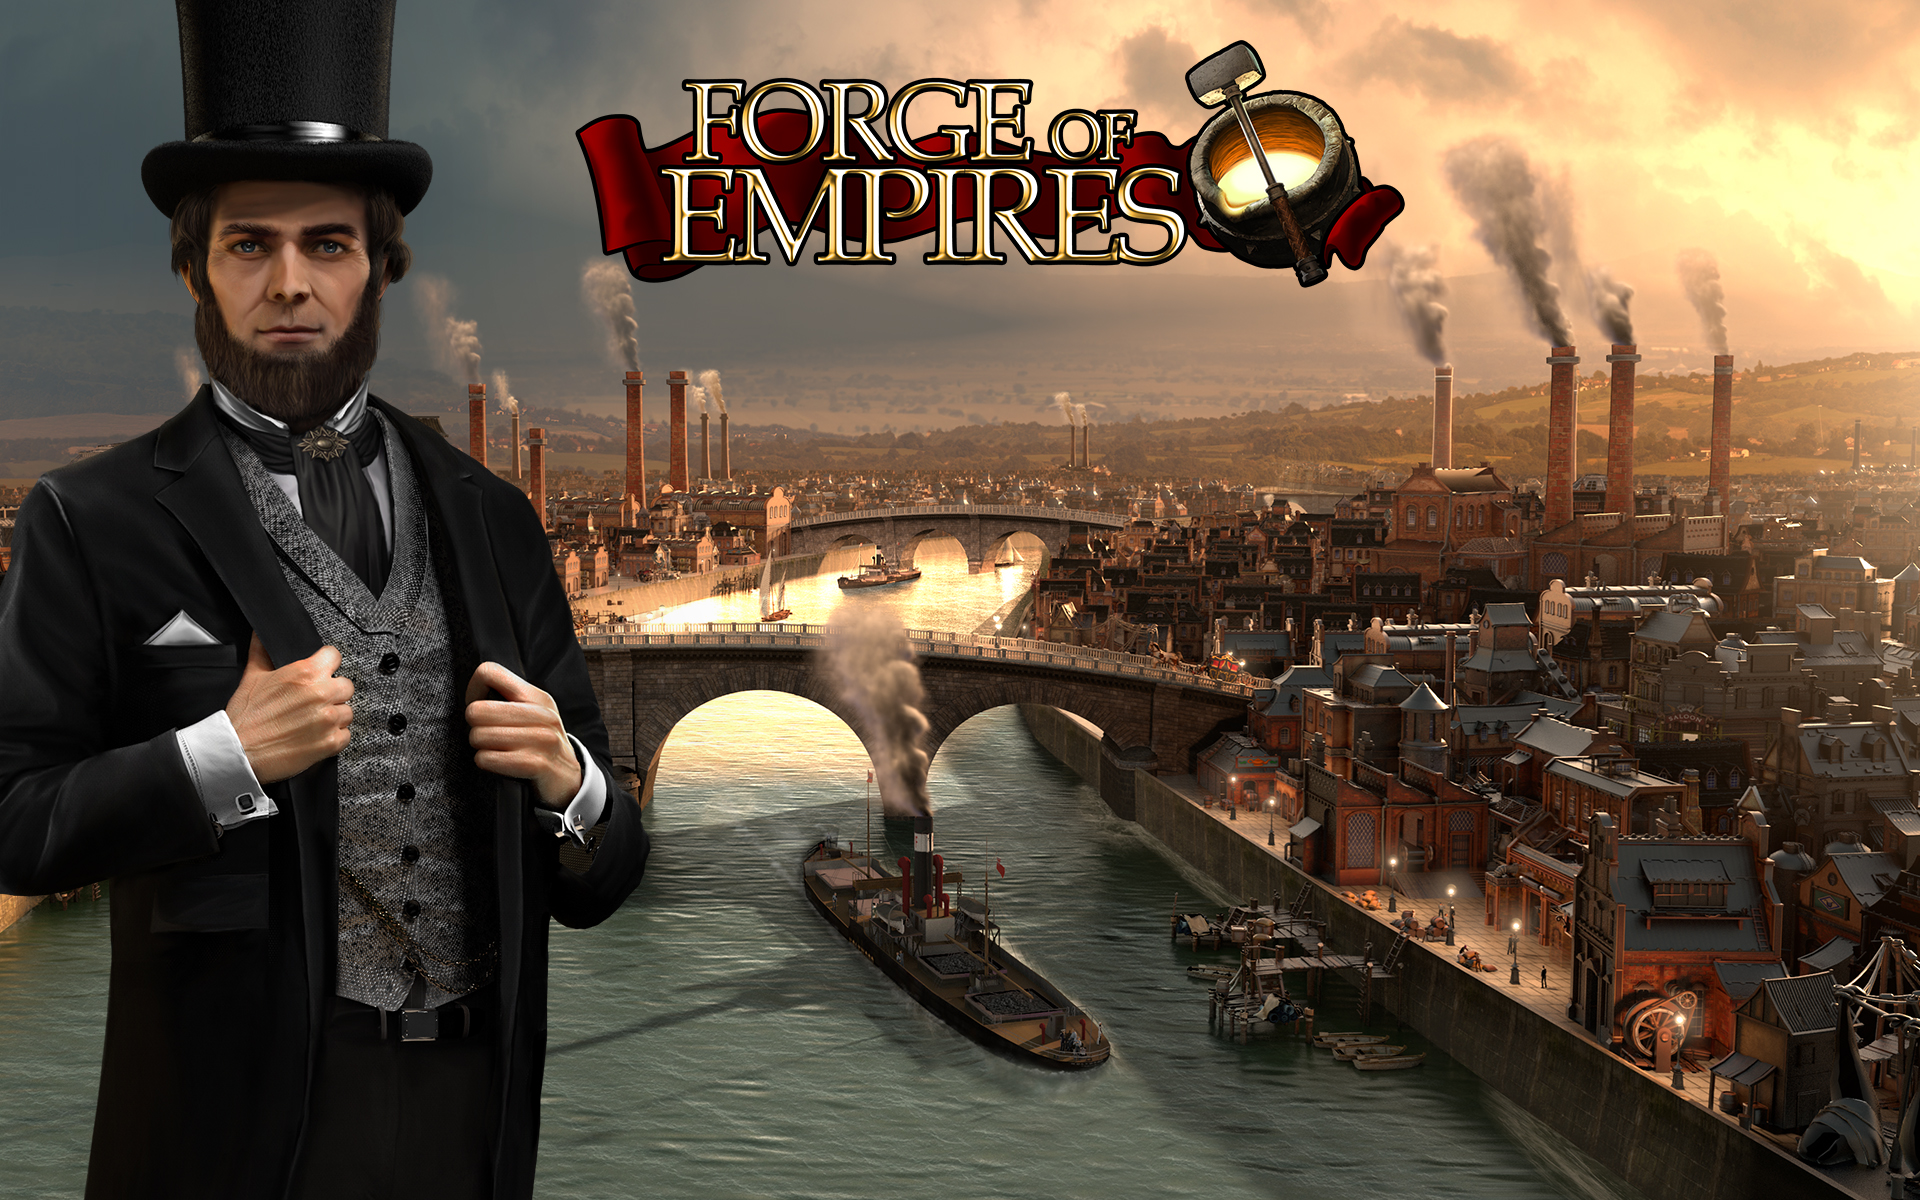 video game, forge of empires, bridge, city, industrial, river, ship, sunset, water